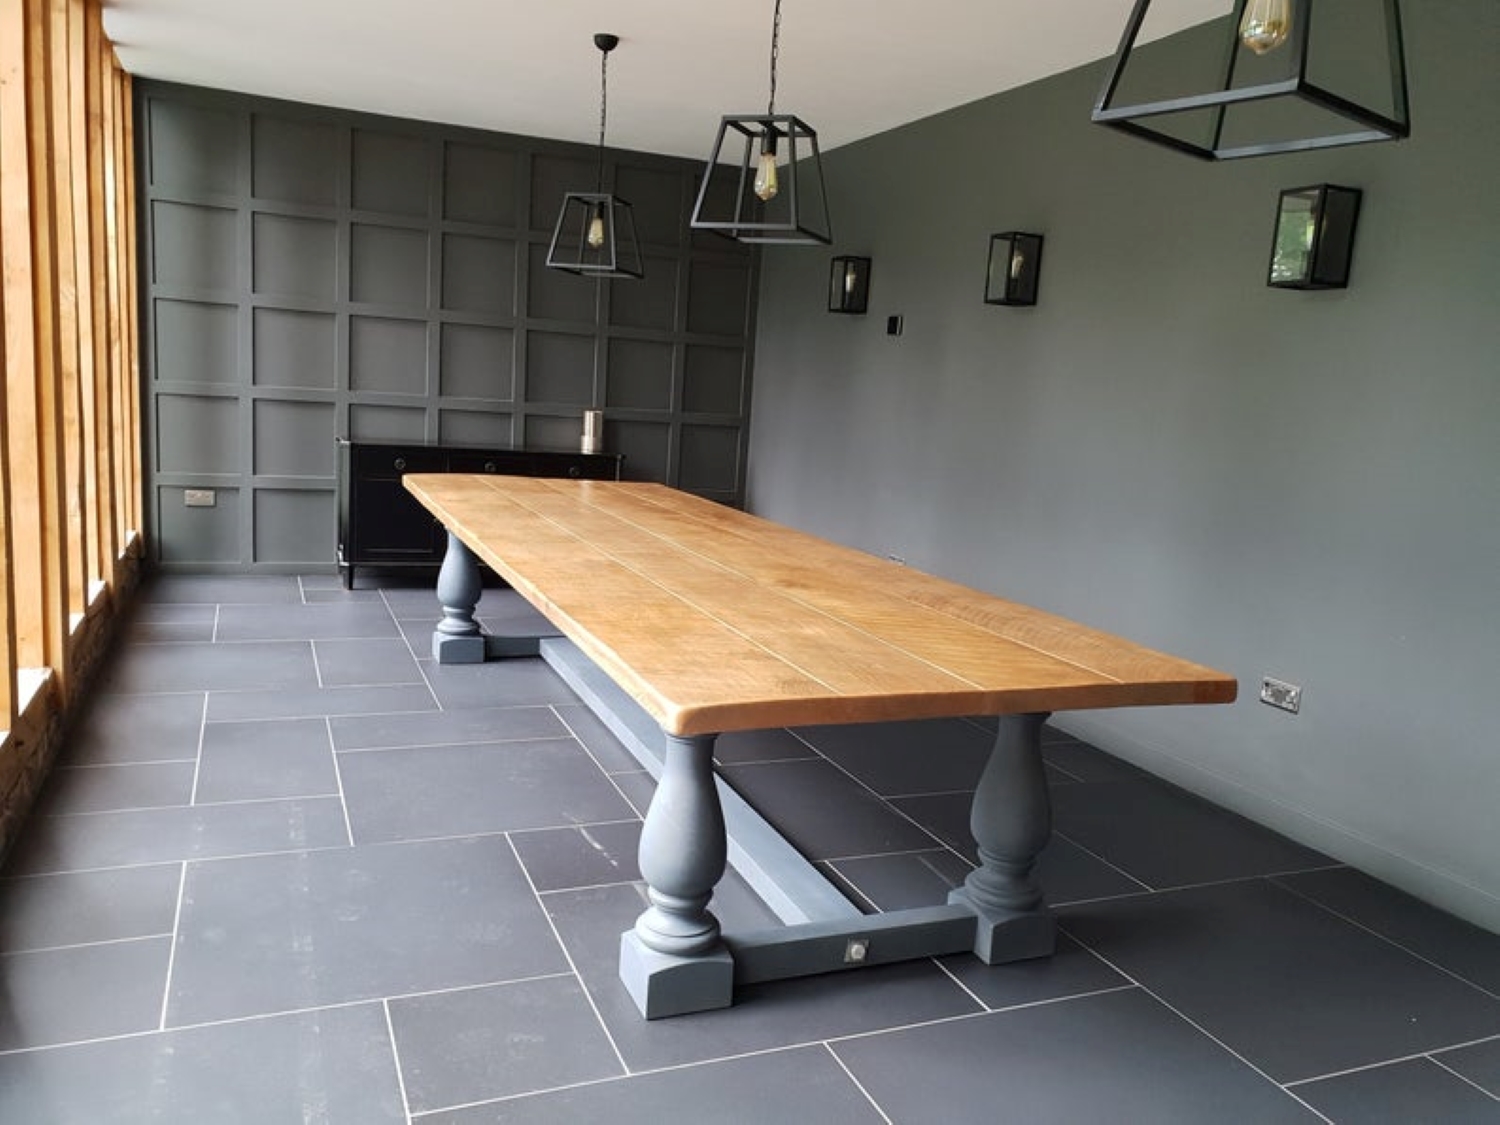 Large Rustic Style Dining Table with Balustrade Legs